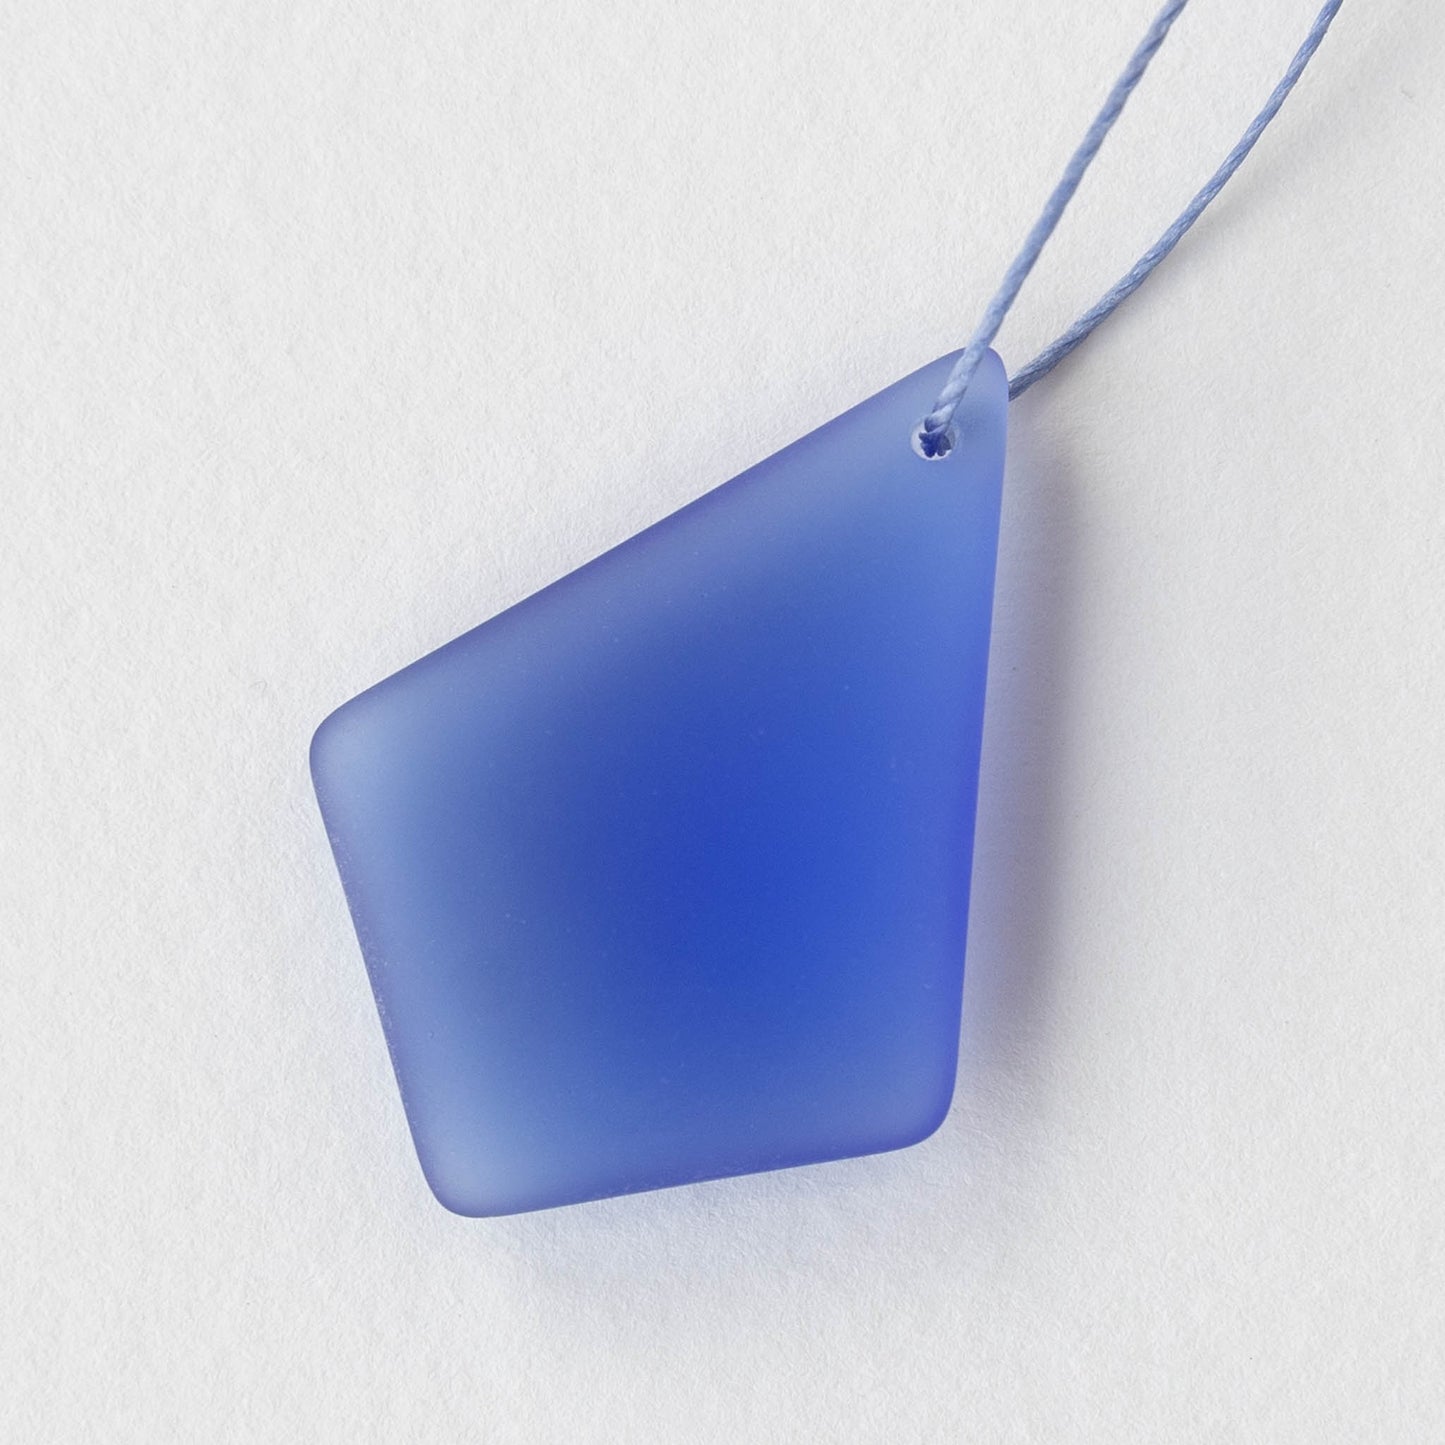 26x36mm Frosted Glass Diamond Pendants - Sapphire Blue - 2 or 6